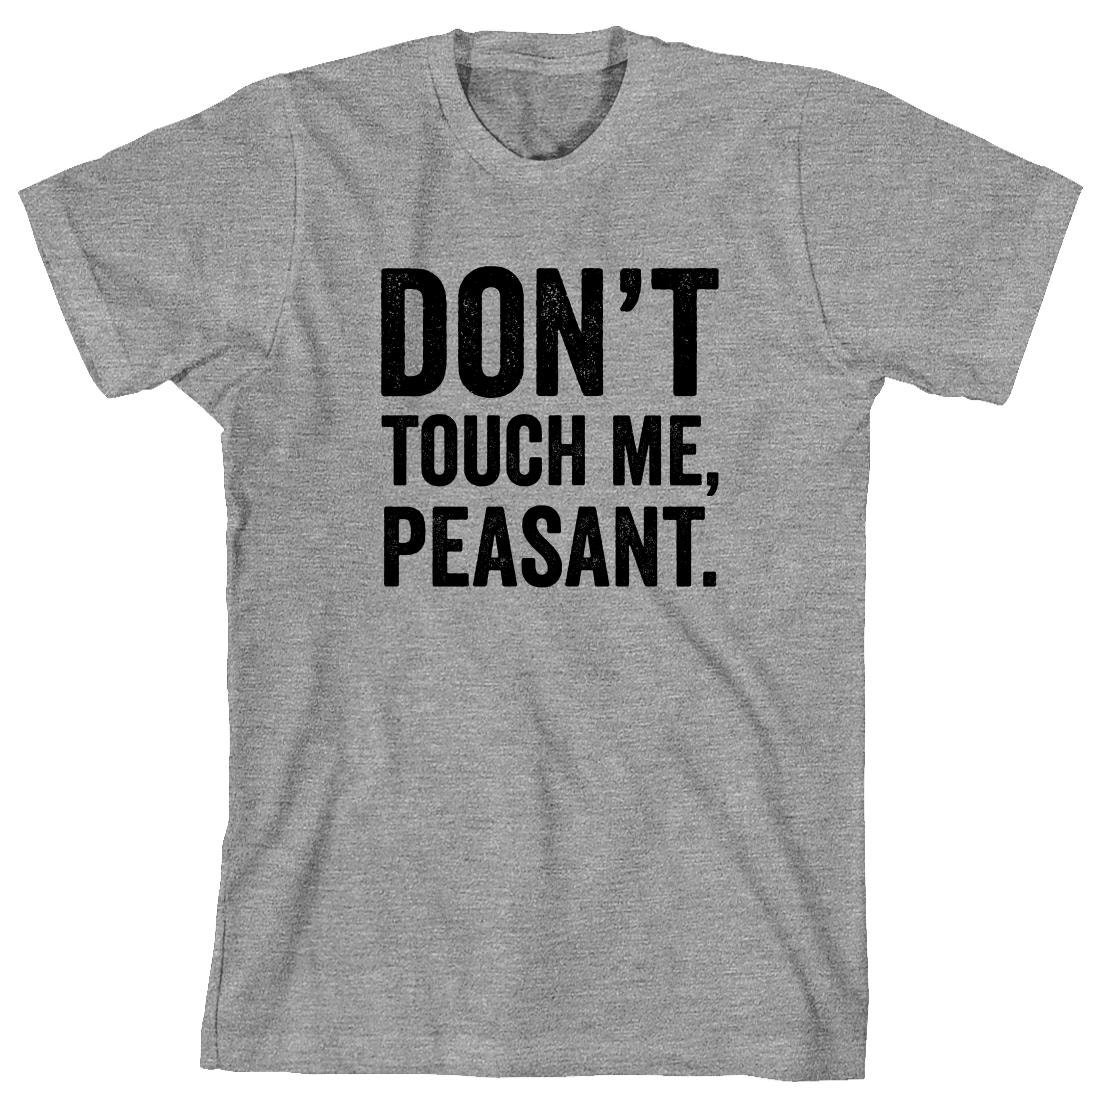 Don't Touch Me Peasant Shirt gift idea British humor